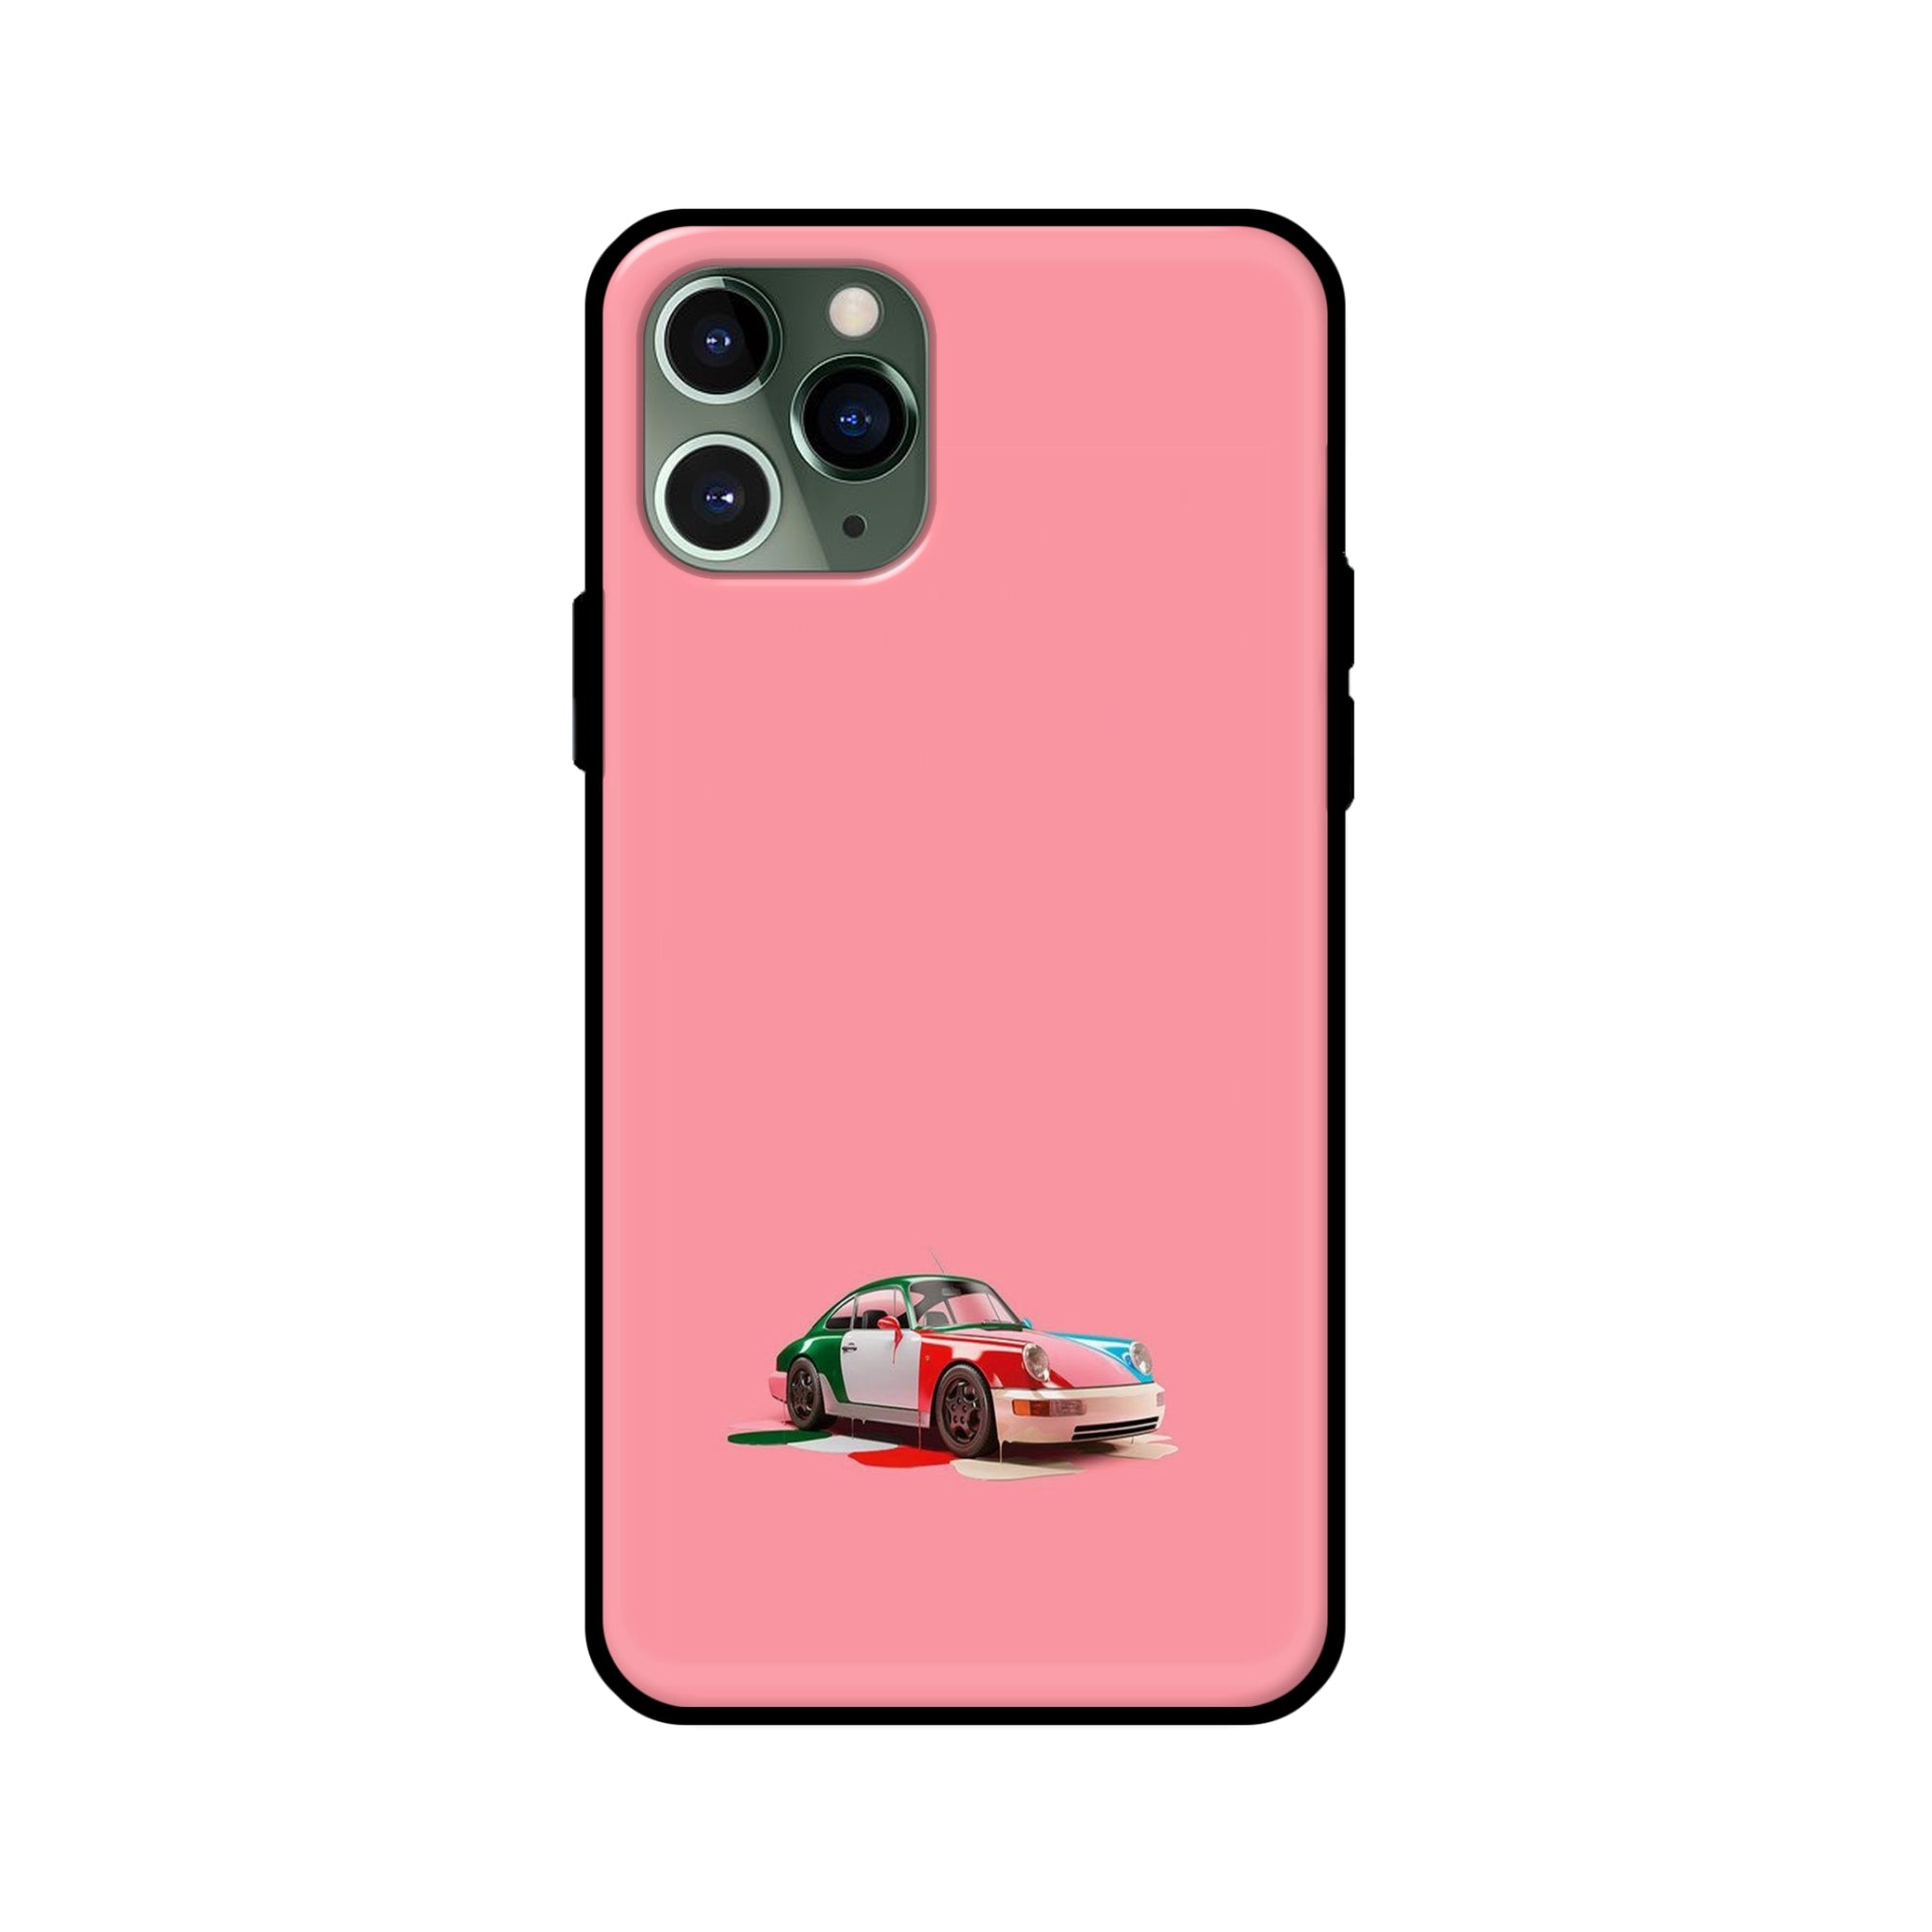 Buy Pink Porche Glass/Metal Back Mobile Phone Case/Cover For iPhone 11 Pro Online